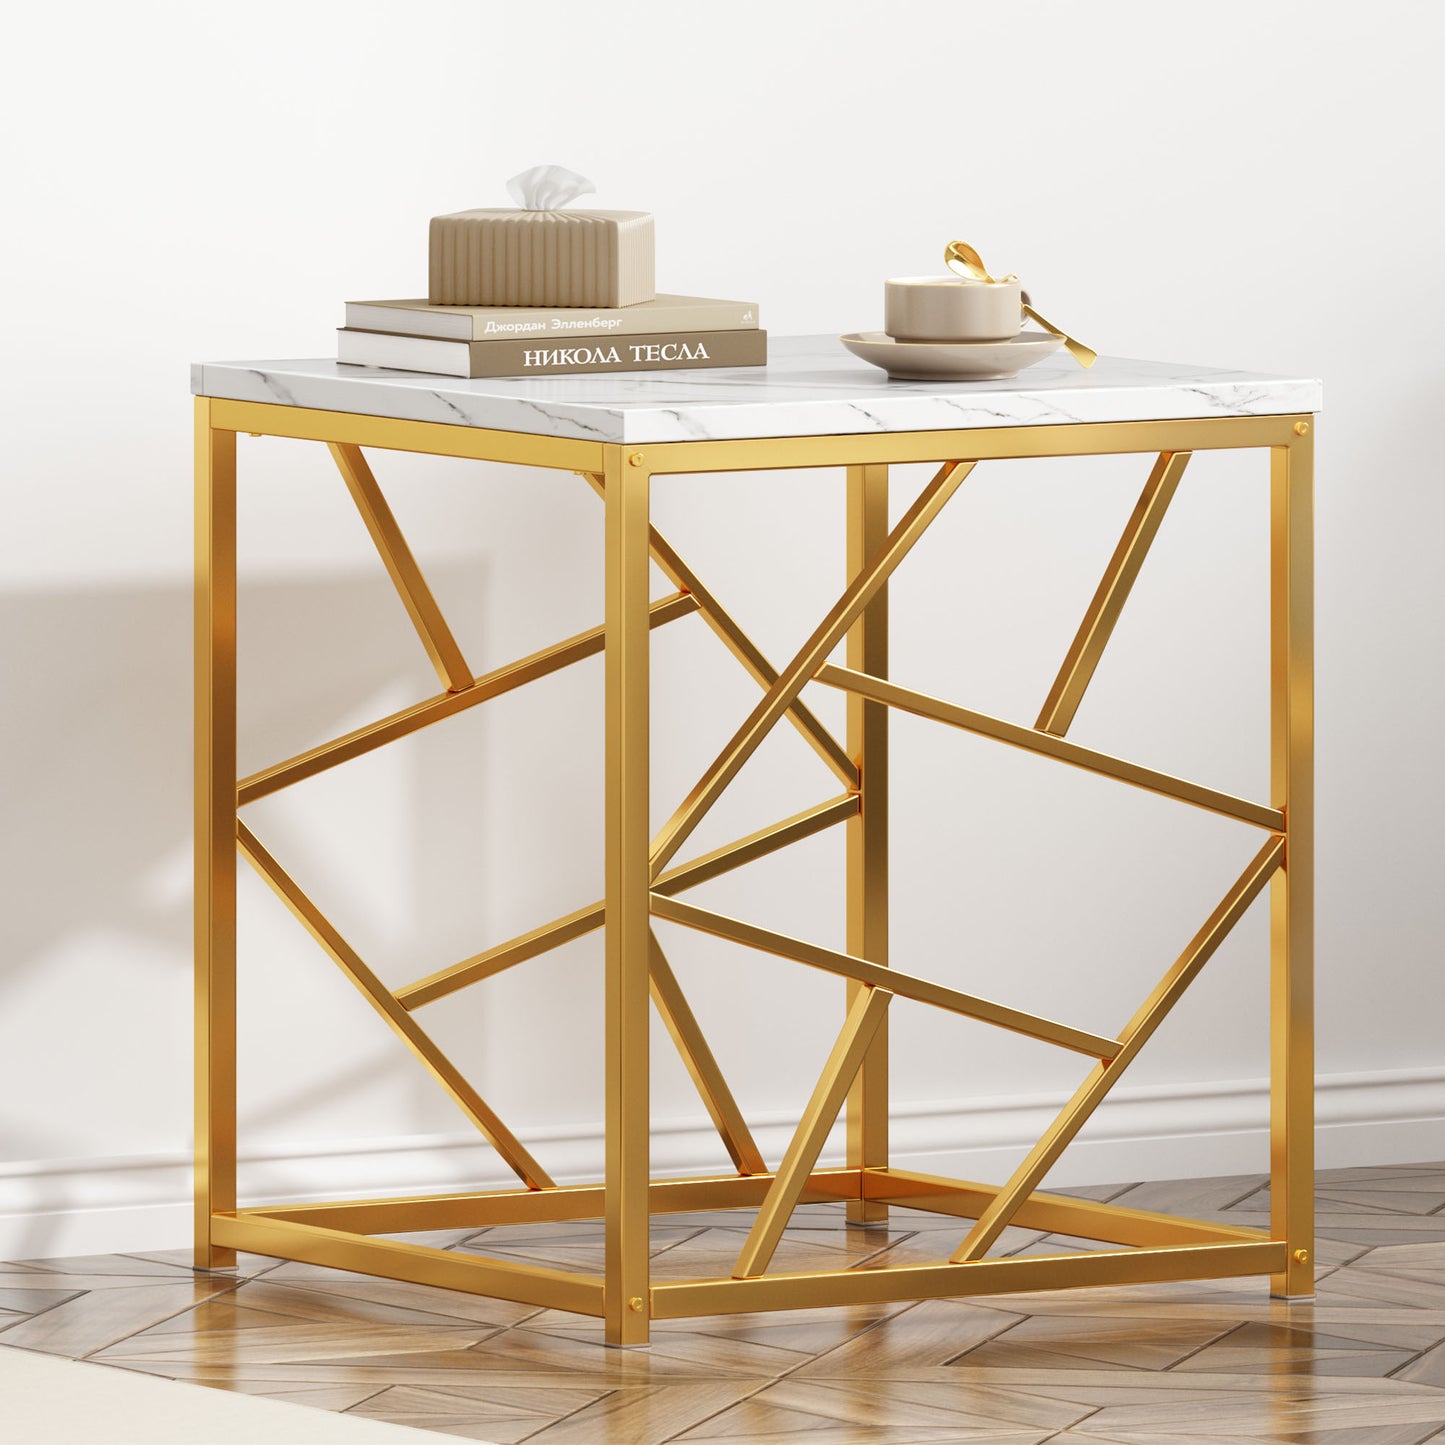 Soges Professional Square Side Table - Sturdy Structure, Durable and Stylish Coffee Table